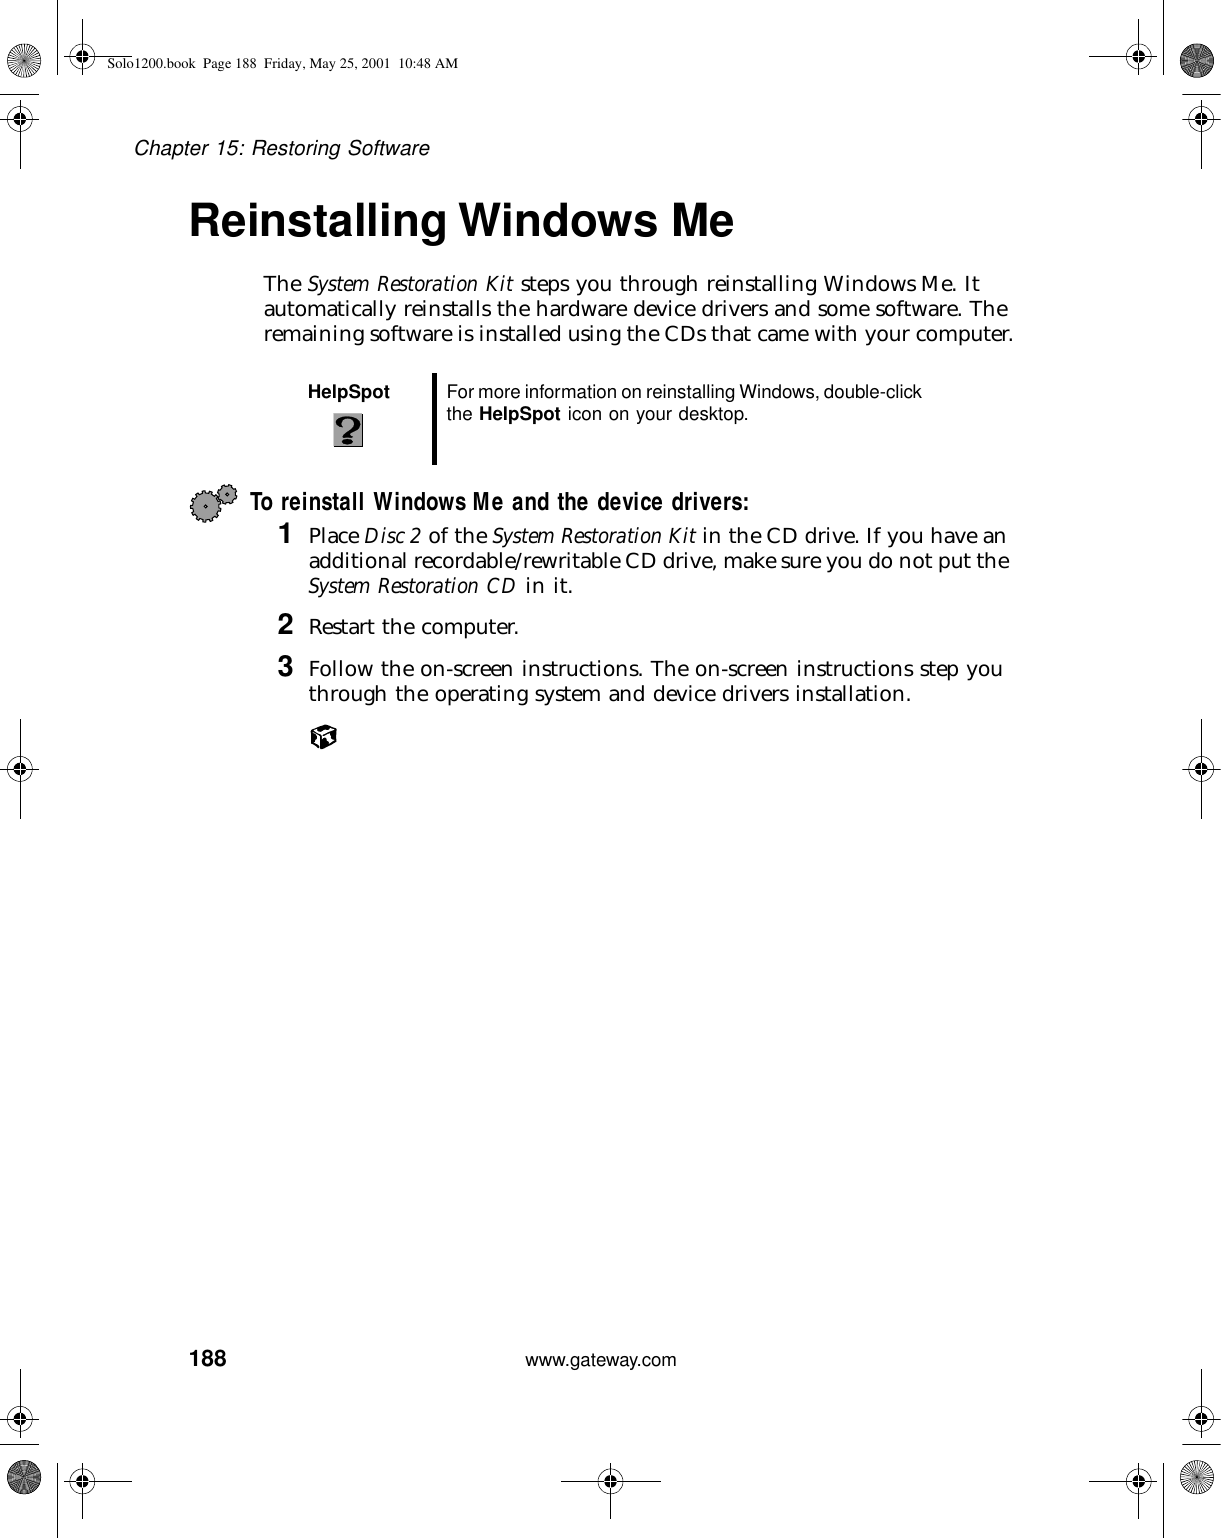 188Chapter 15: Restoring Softwarewww.gateway.comReinstalling Windows MeThe System Restoration Kit steps you through reinstalling Windows Me. It automatically reinstalls the hardware device drivers and some software. The remaining software is installed using the CDs that came with your computer.To reinstall Windows Me and the device drivers:1Place Disc 2 of the System Restoration Kit in the CD drive. If you have an additional recordable/rewritable CD drive, make sure you do not put the System Restoration CD in it.2Restart the computer.3Follow the on-screen instructions. The on-screen instructions step you through the operating system and device drivers installation.HelpSpot For more information on reinstalling Windows, double-click the HelpSpot icon on your desktop.Solo1200.book Page 188 Friday, May 25, 2001 10:48 AM